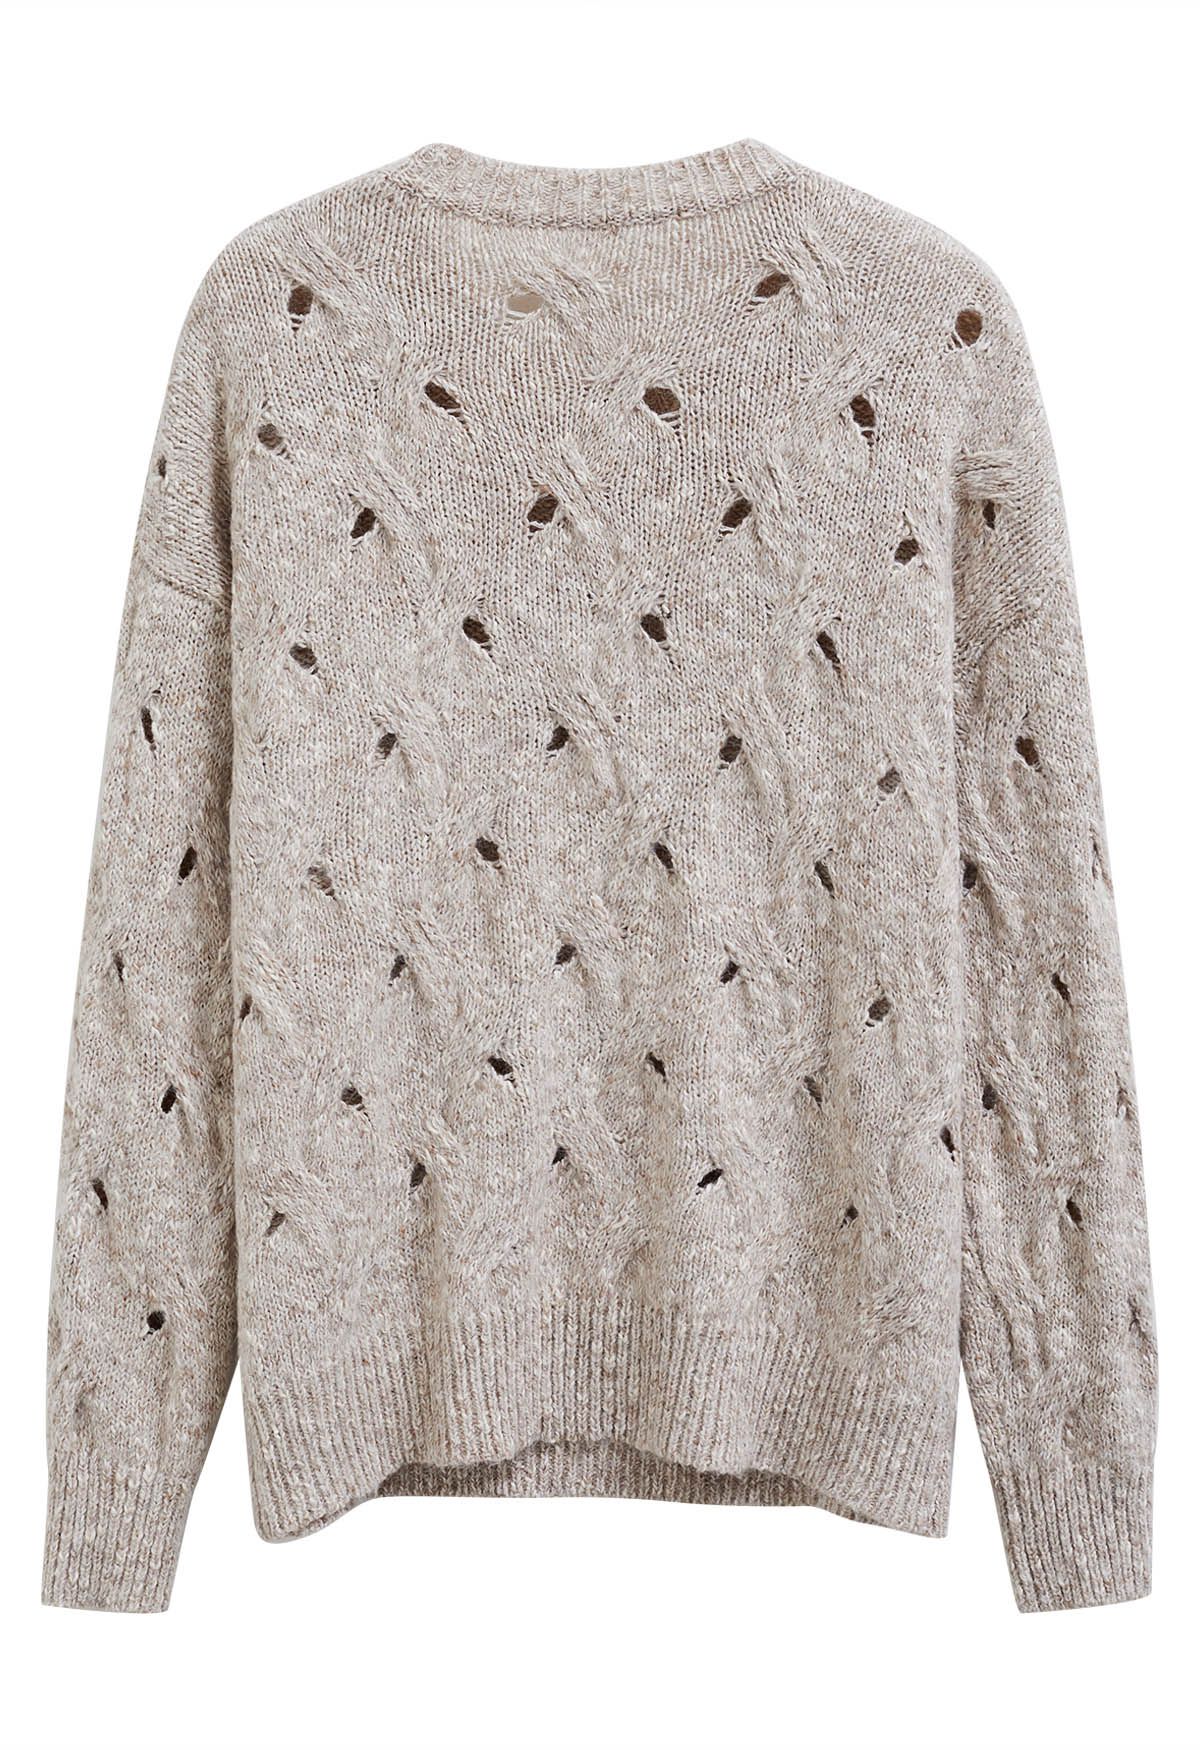 Hollow Out Mix-Color Cable Knit Sweater in Oatmeal